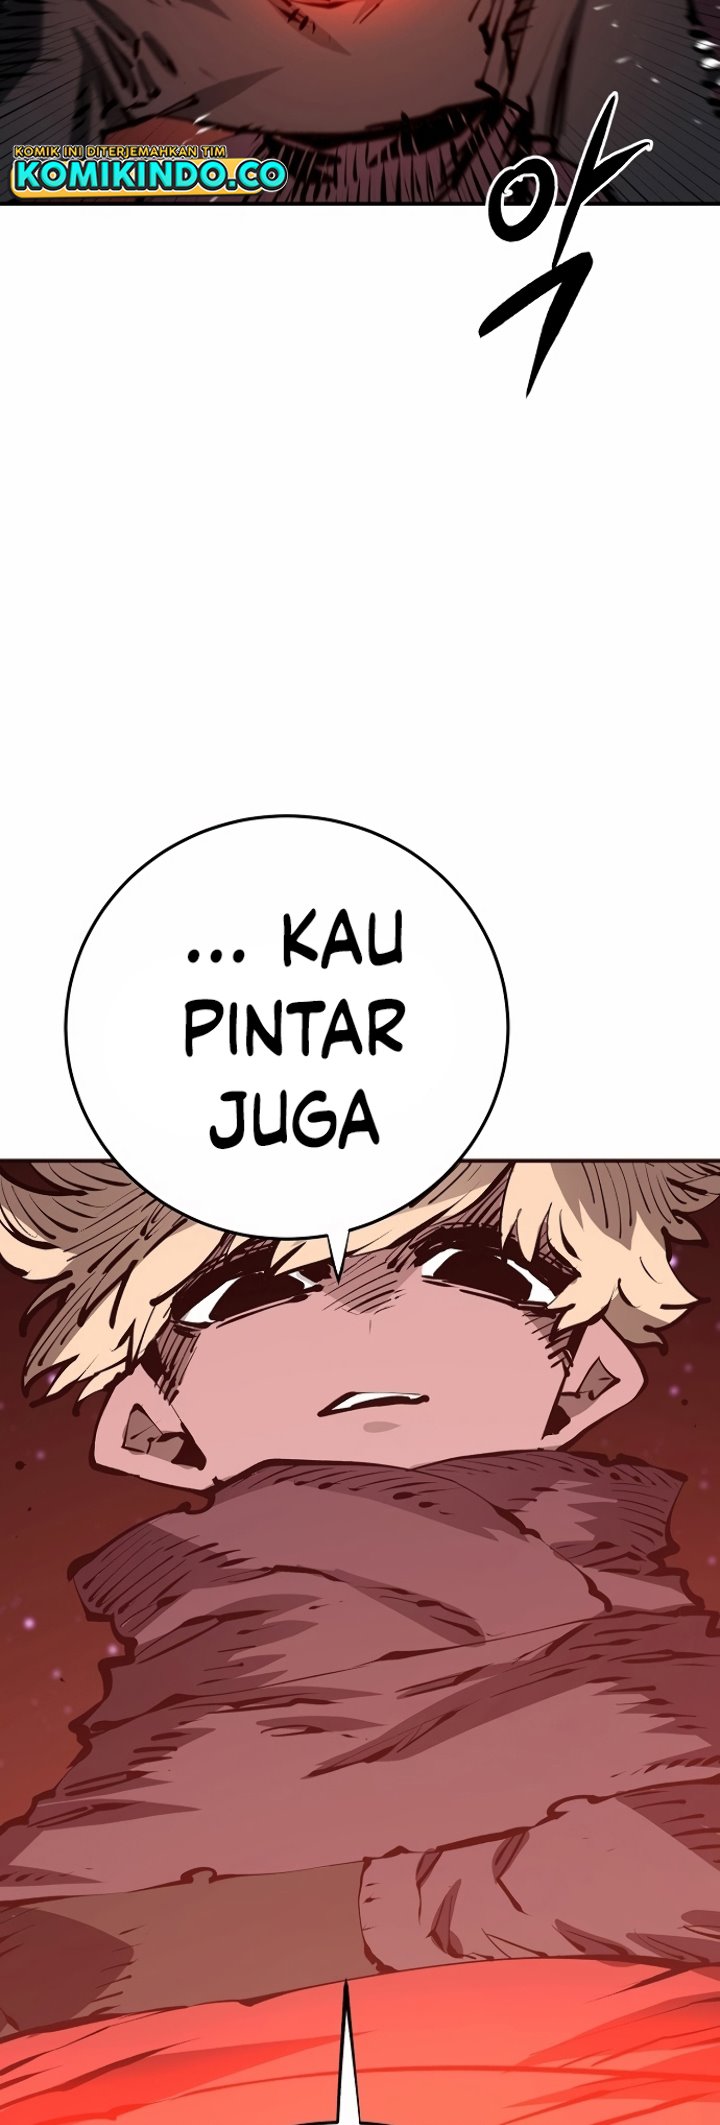 Player Chapter 67 Bahasa Indonesia